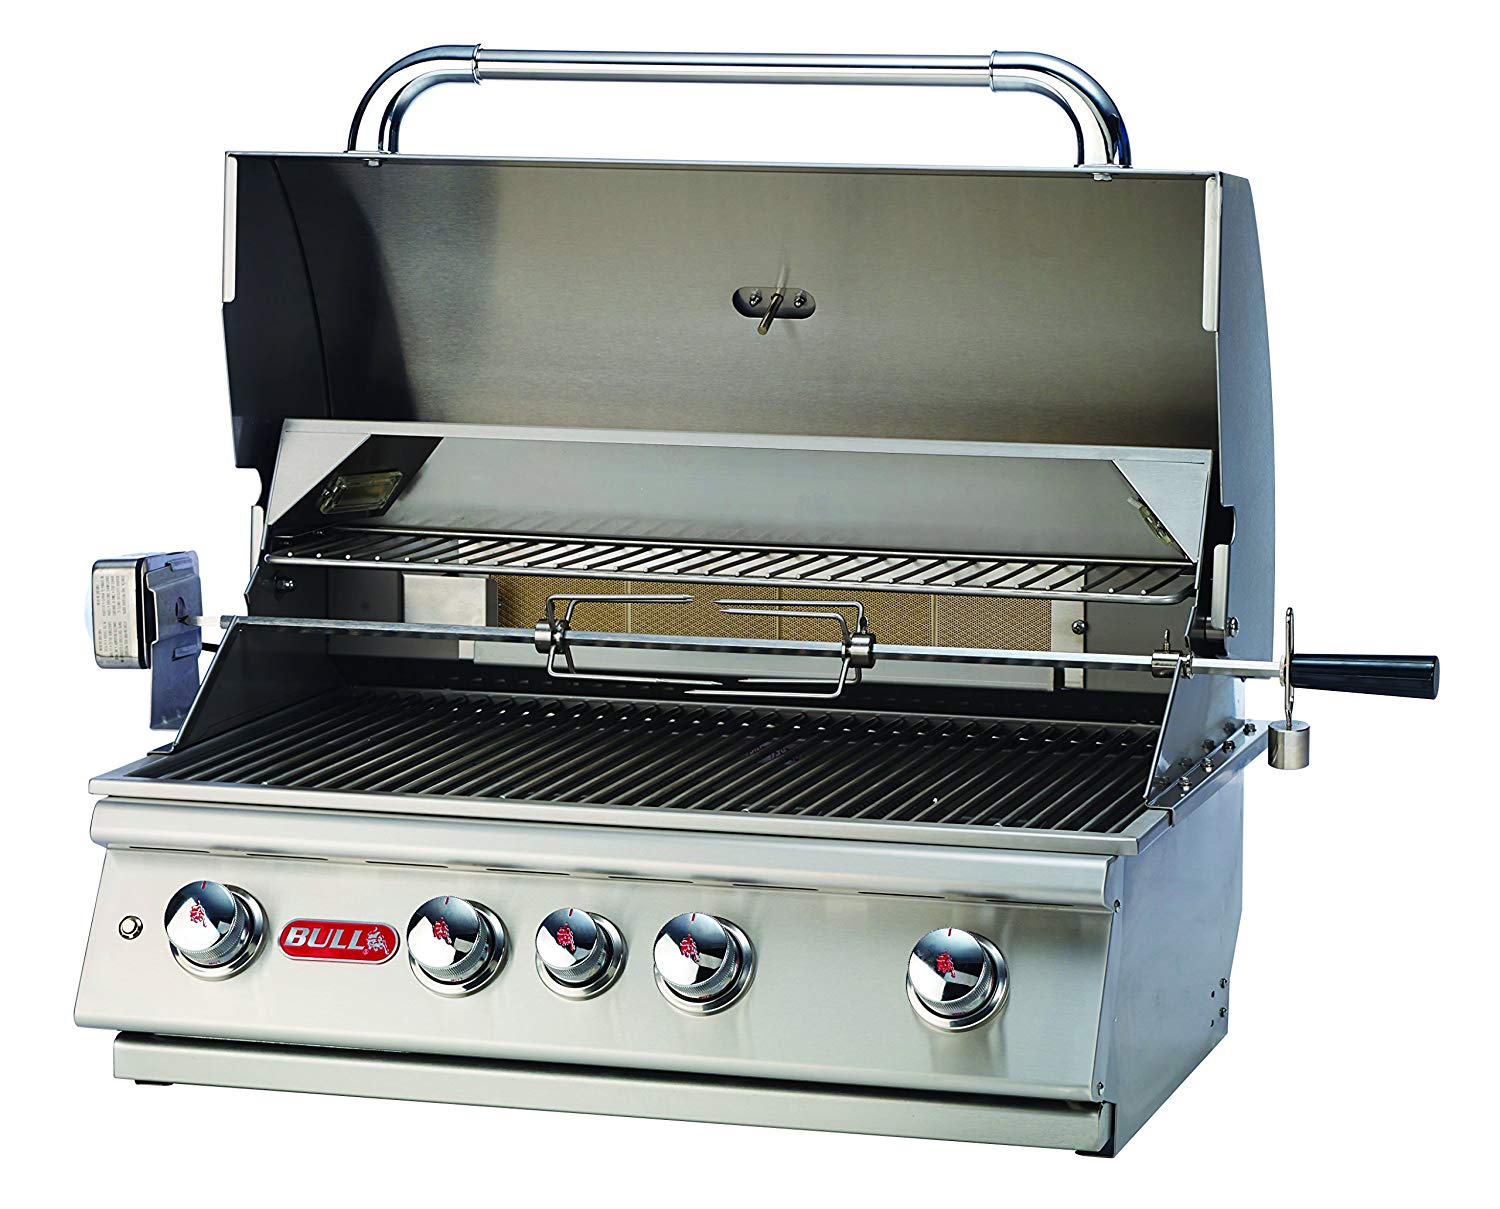 Barbecue Coal Grill - Buy Electric, Charcoal and Propane Grills At Best Prices